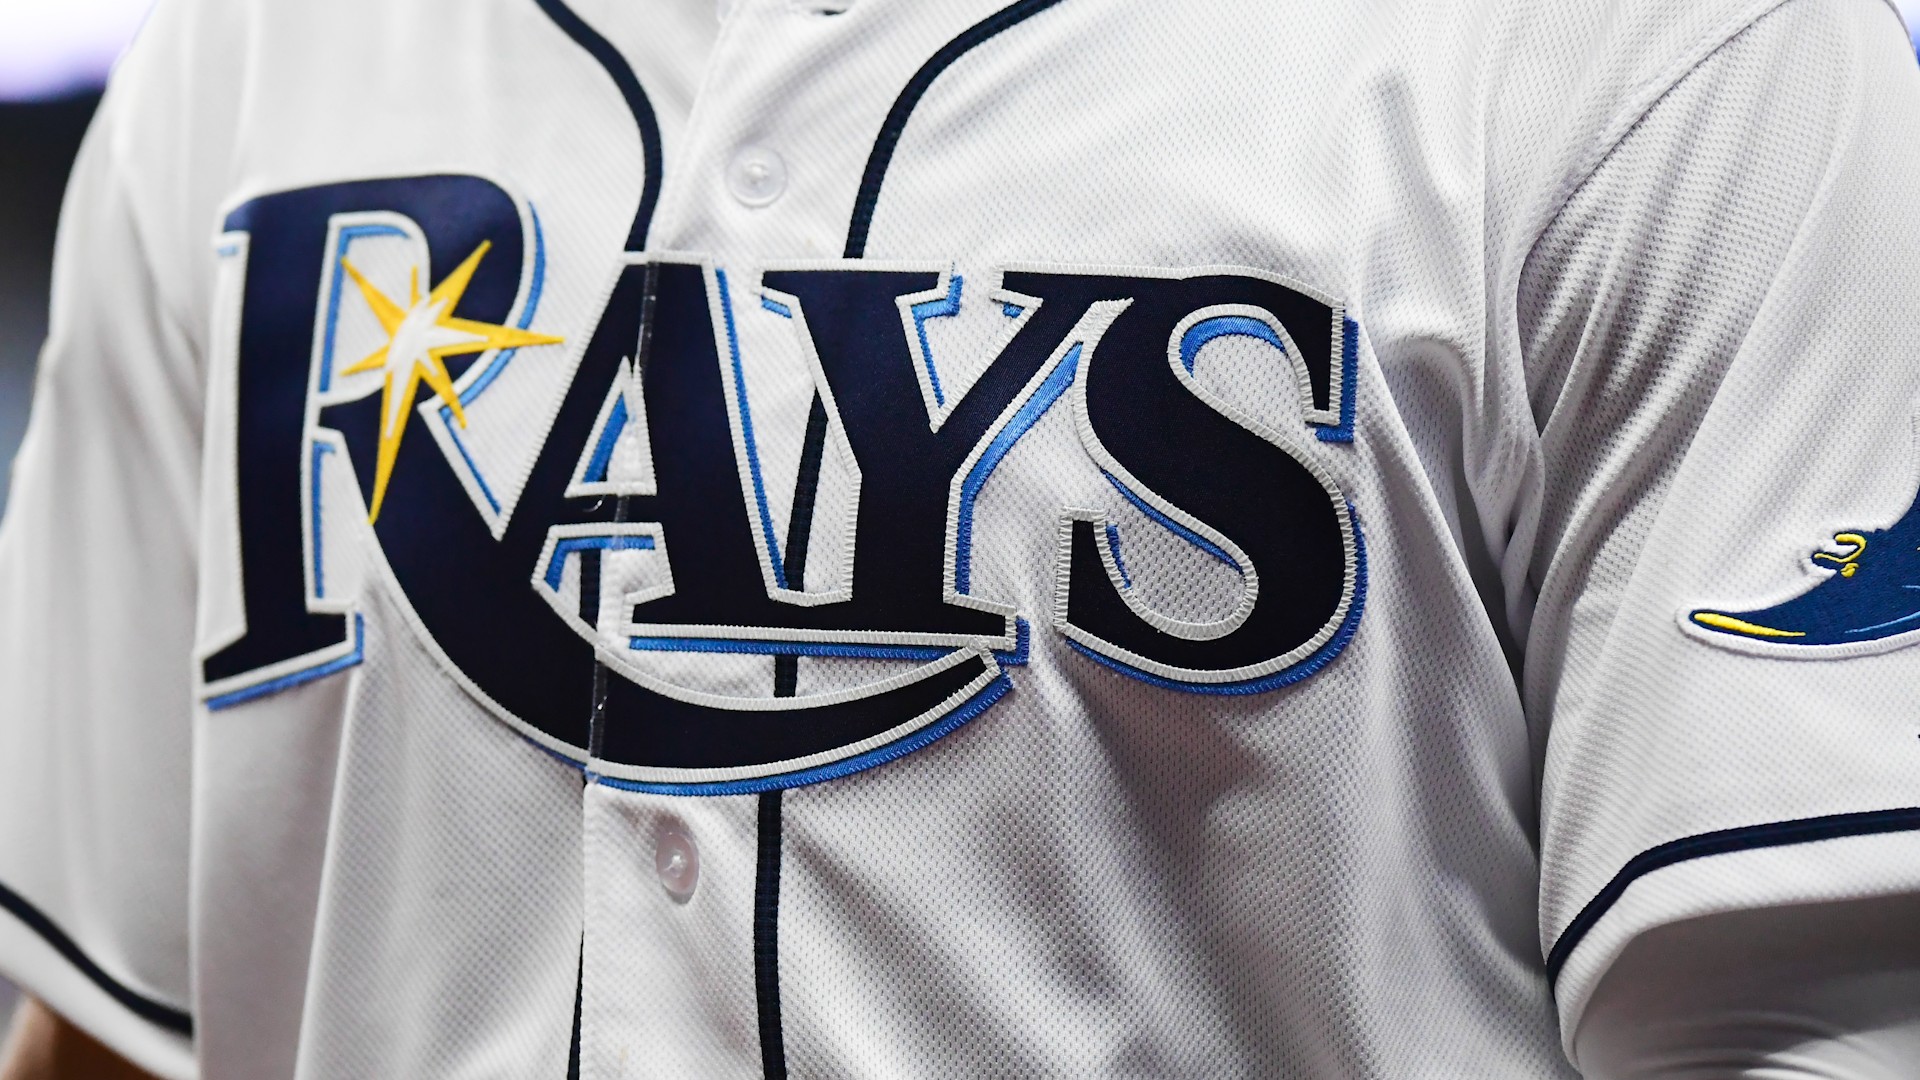 Rays announce deal for new ballpark in St. Petersburg – NBC 5